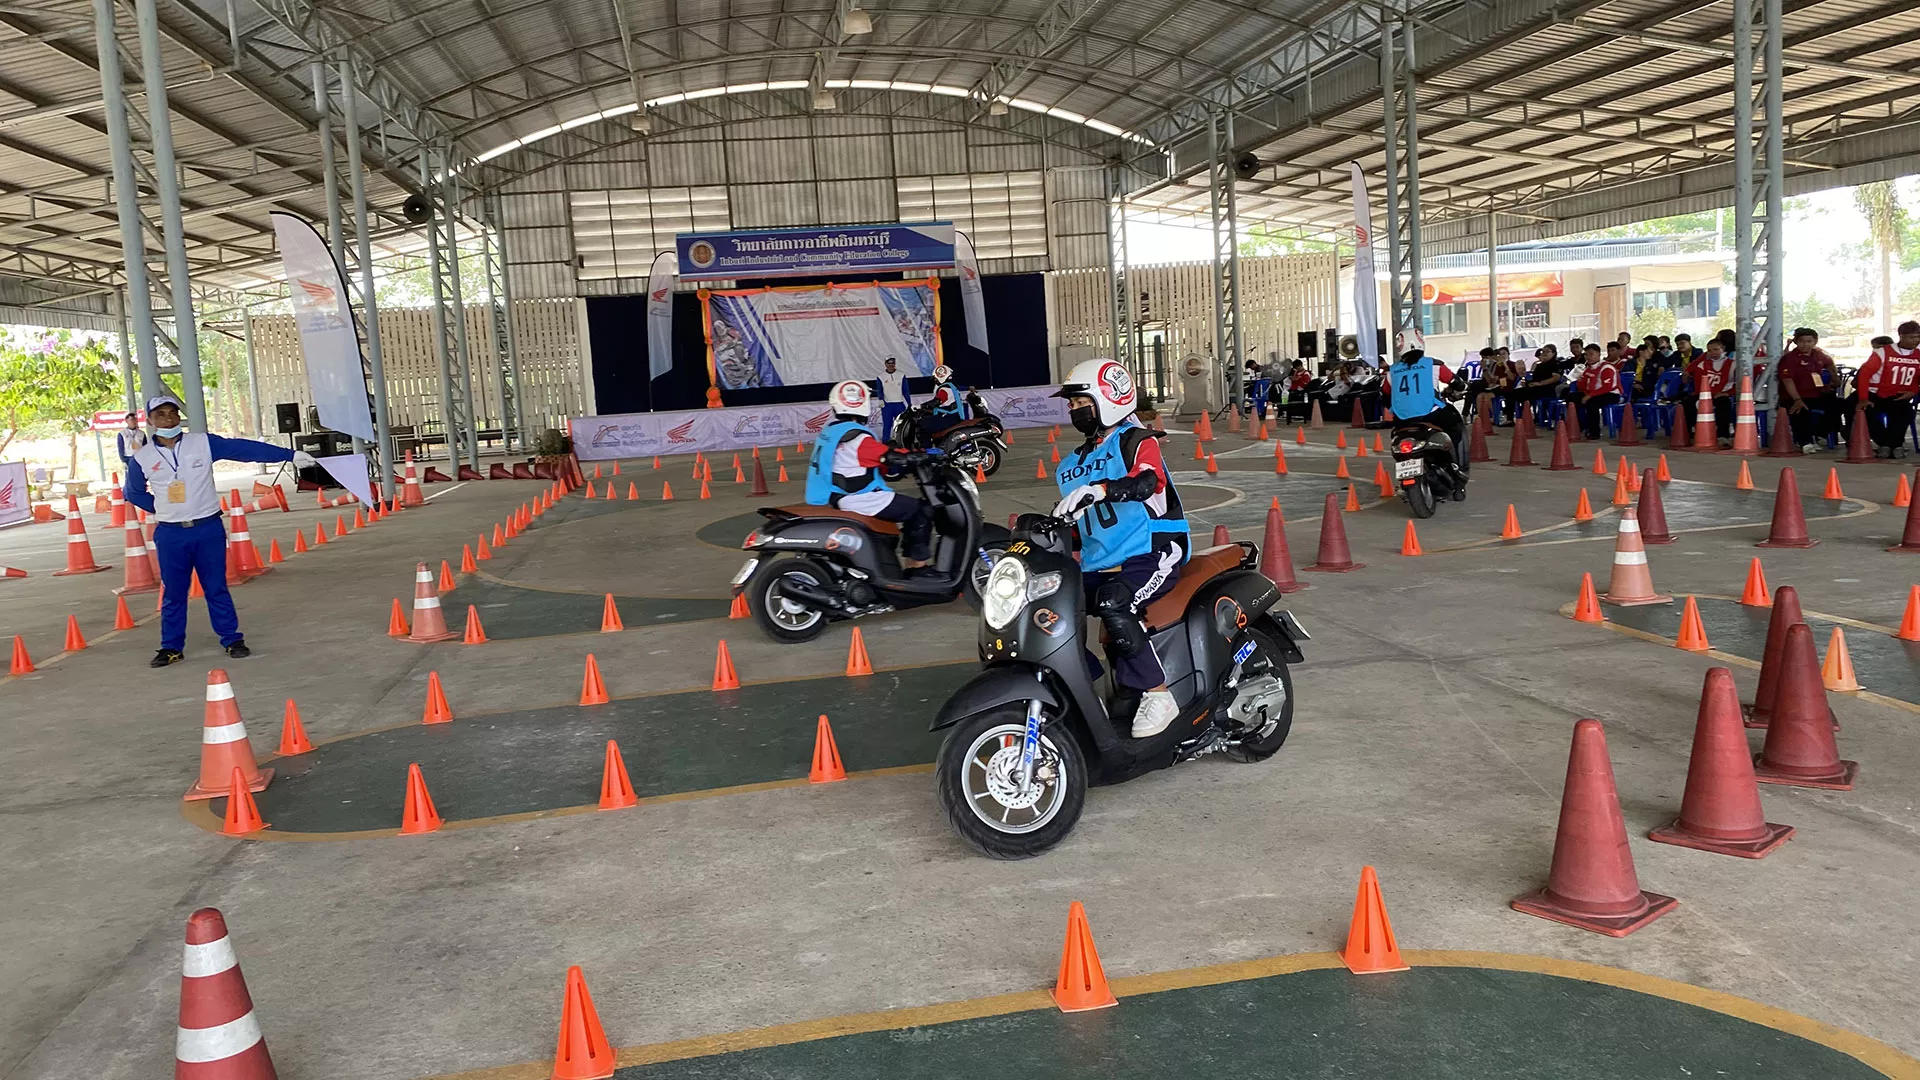 Honda Safety Driving Center in Philippines, Central Asia | Motorcycles - Rated 0.9